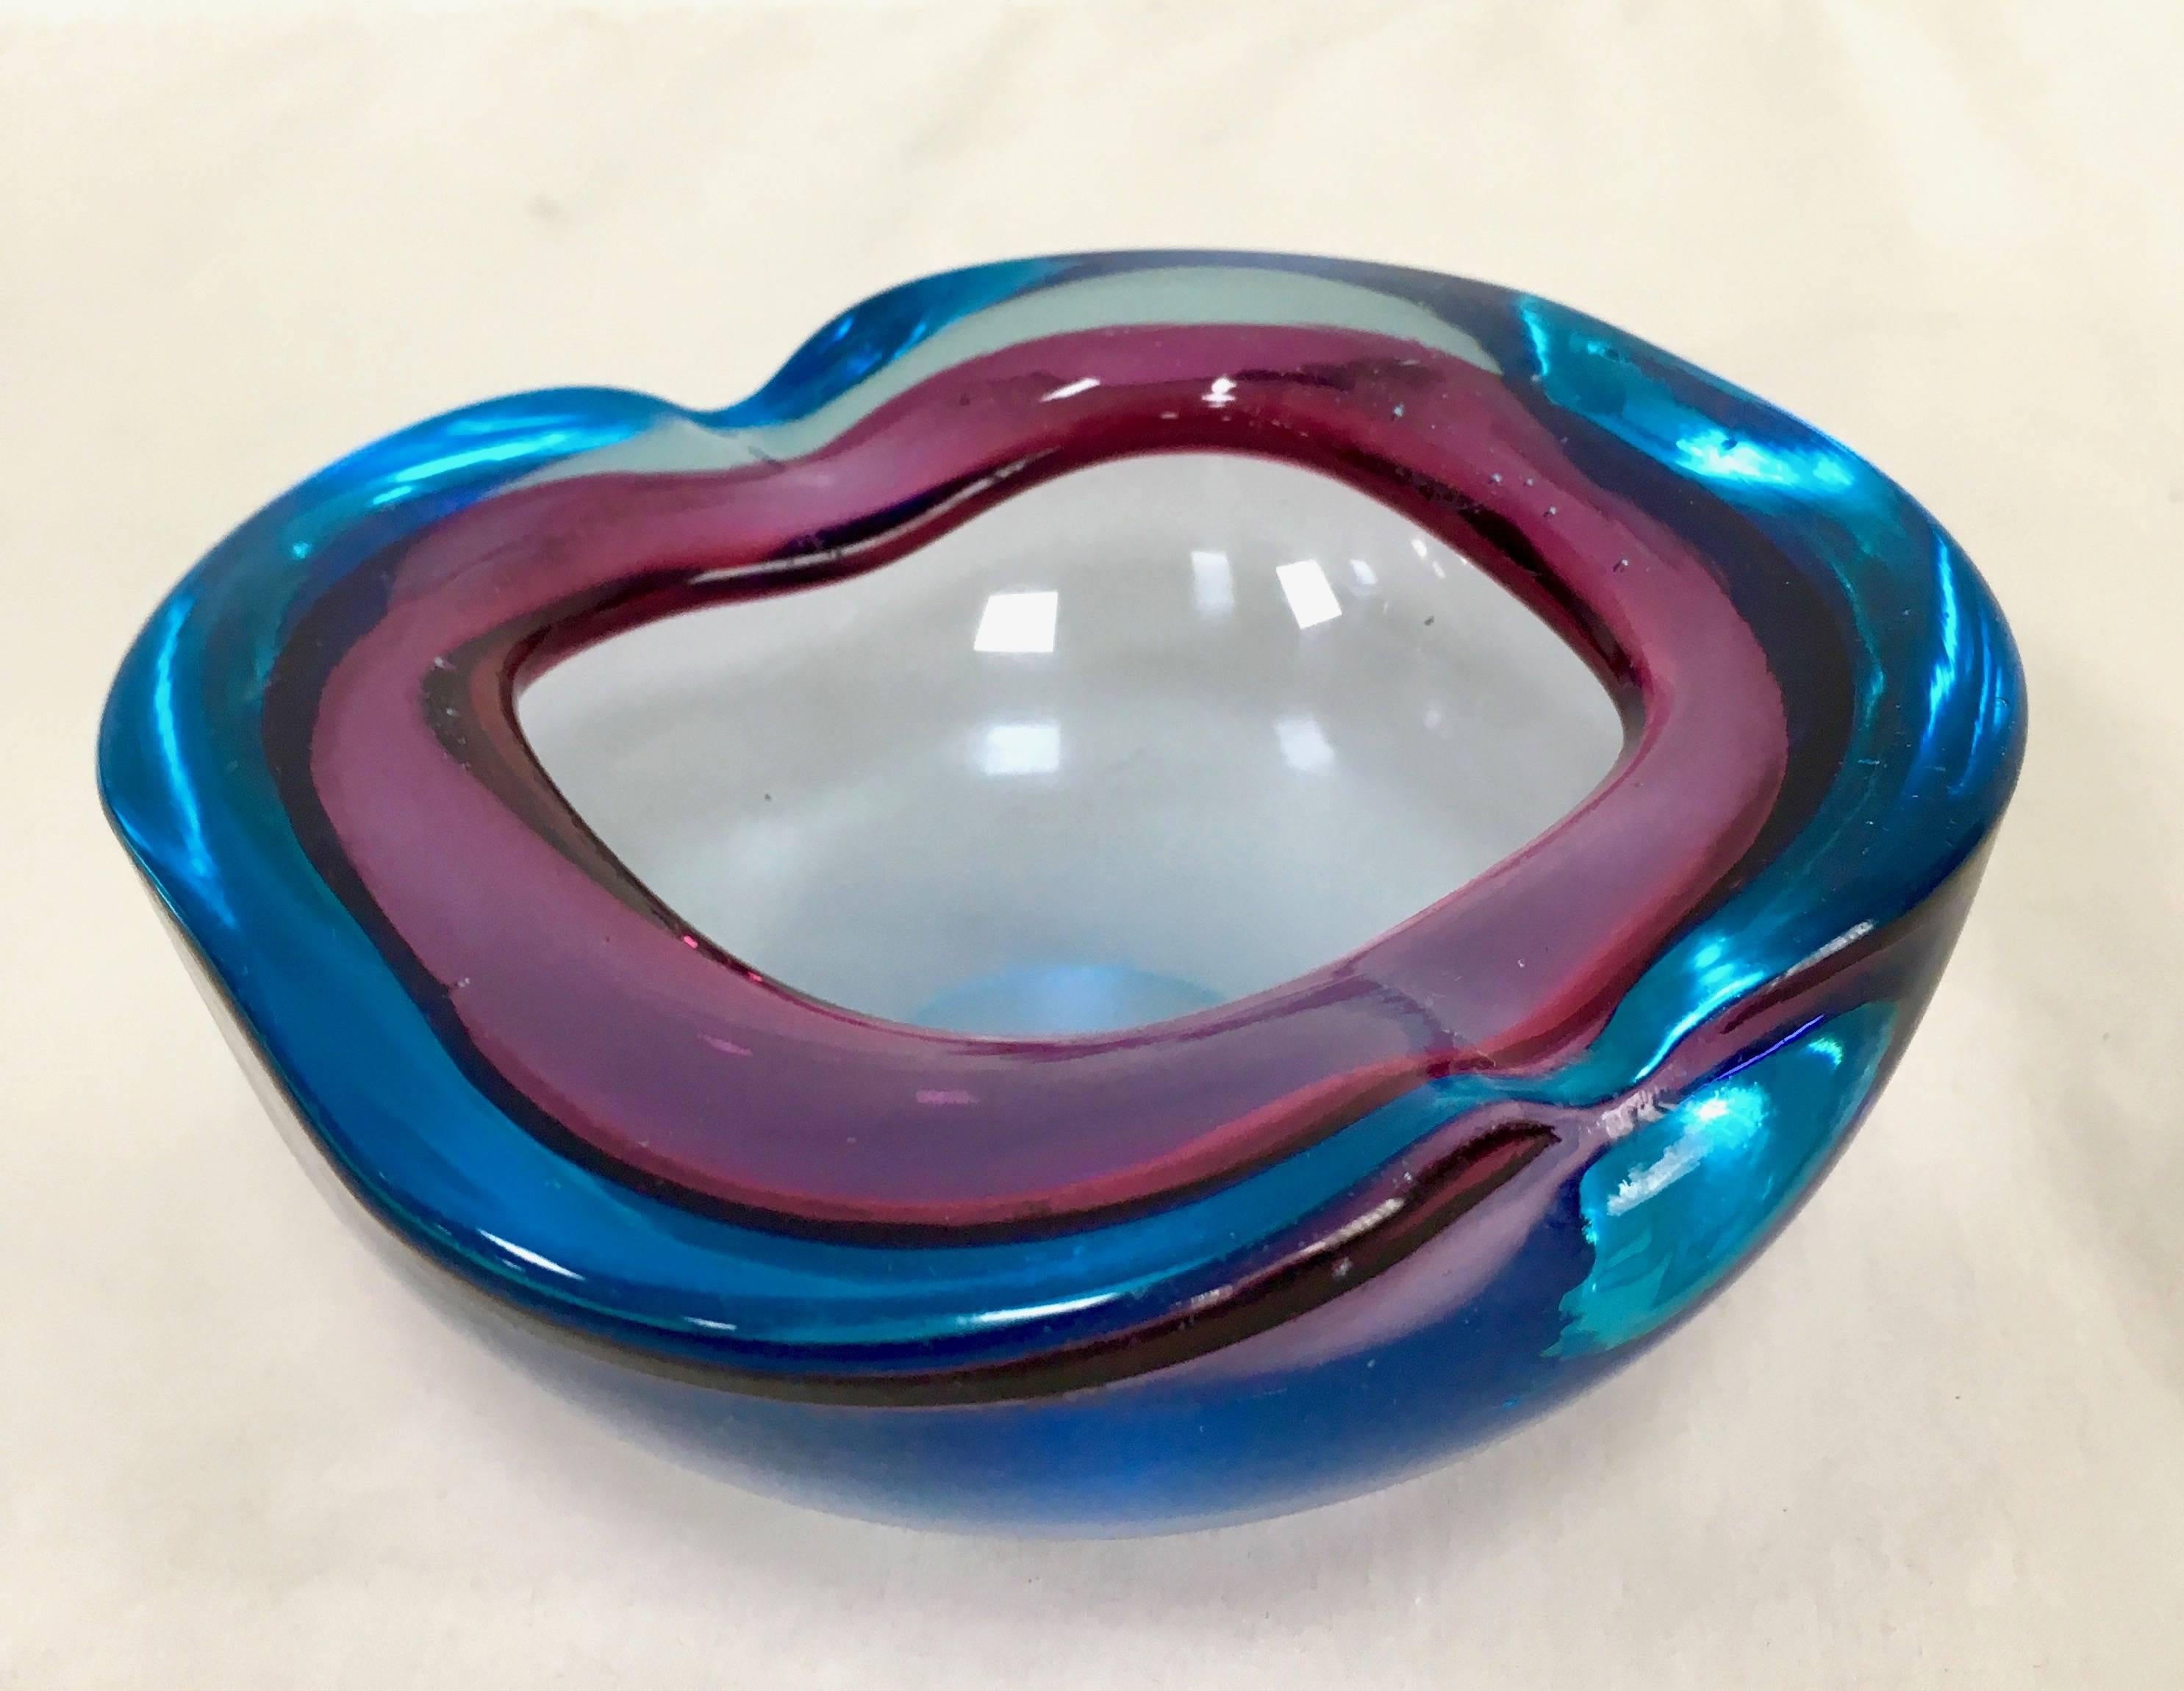 Stunning Murano Italy blue lavender nut bowl ashtray, great for any cocktail table or for holding special things from joints to jewels.